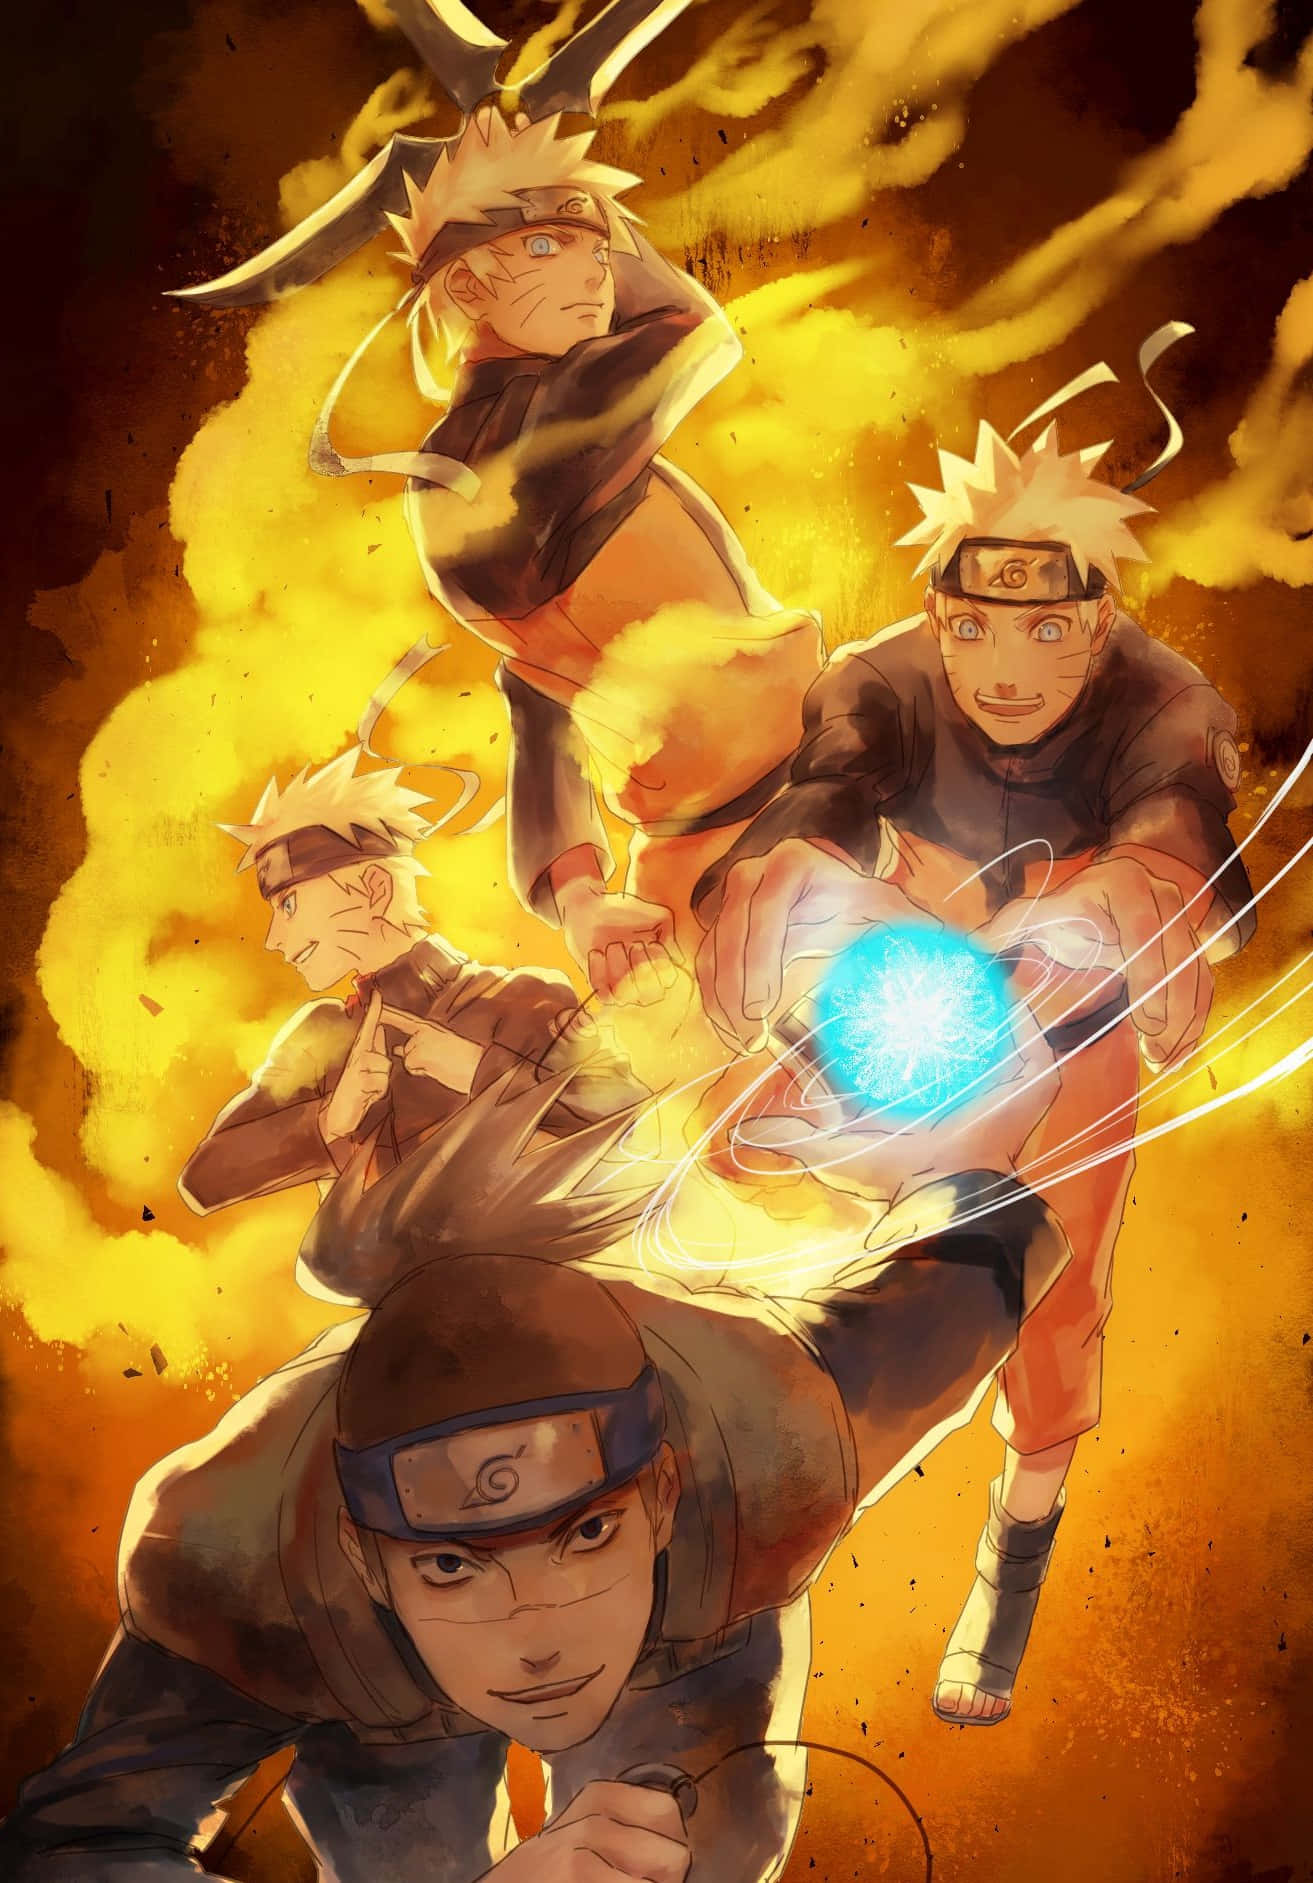 Naruto Uzumaki ready for action in a bold, dynamic phone background